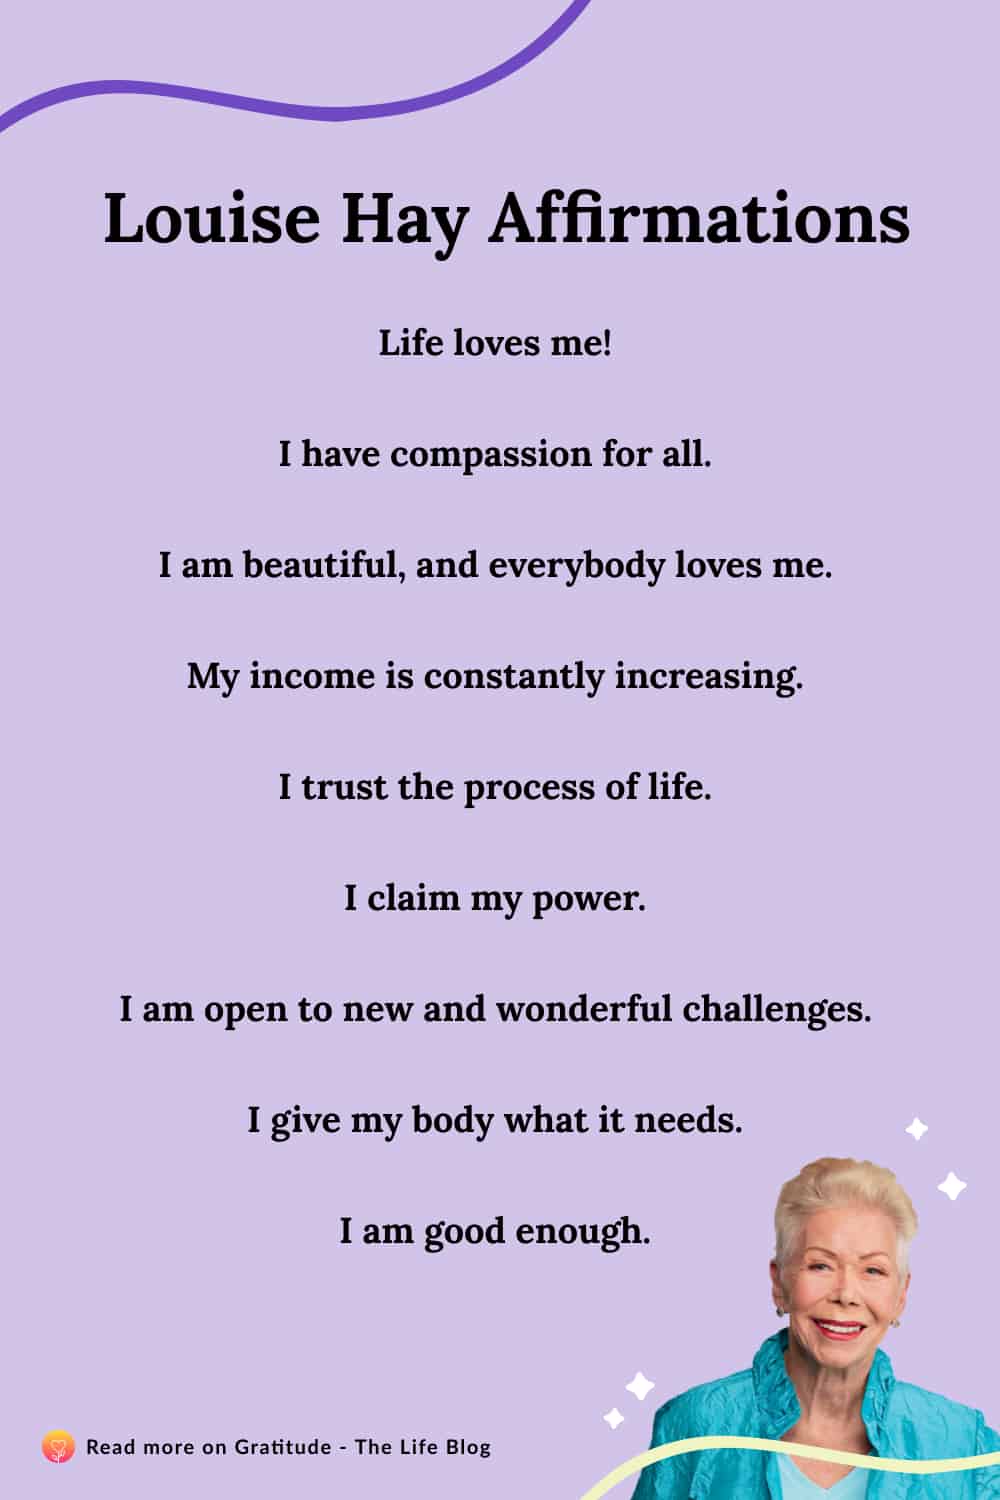 Image with list of Louise Hay affirmations